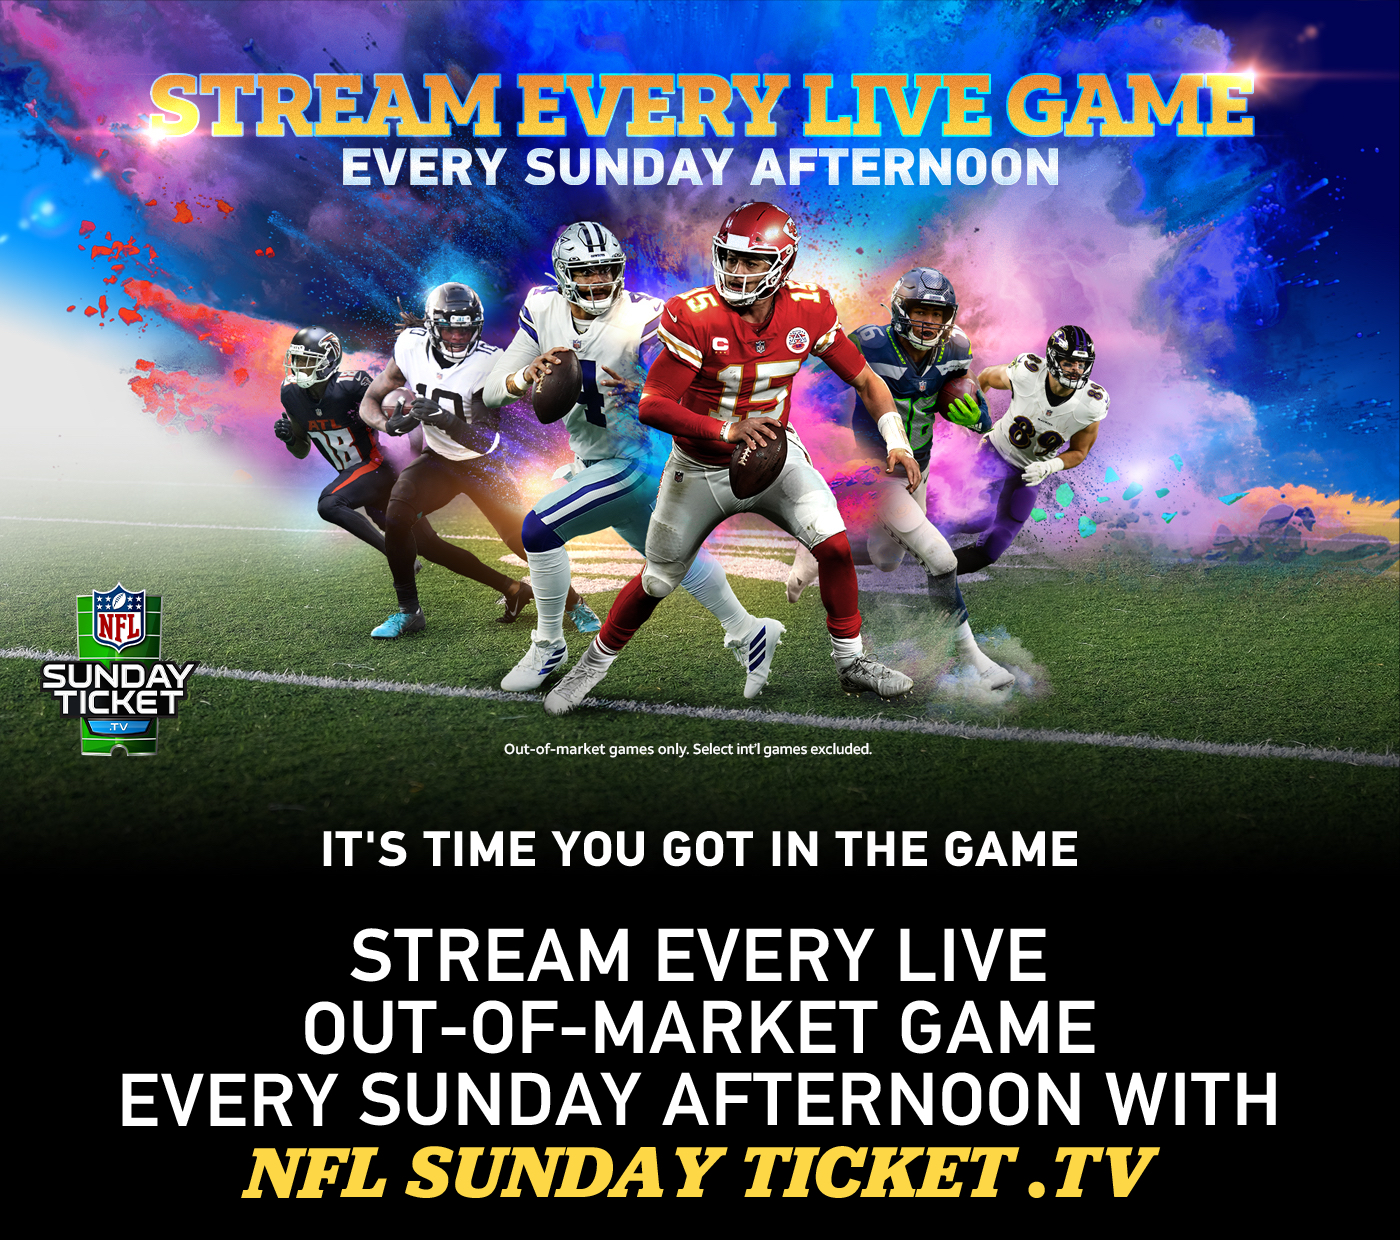 directv channel for monday night football